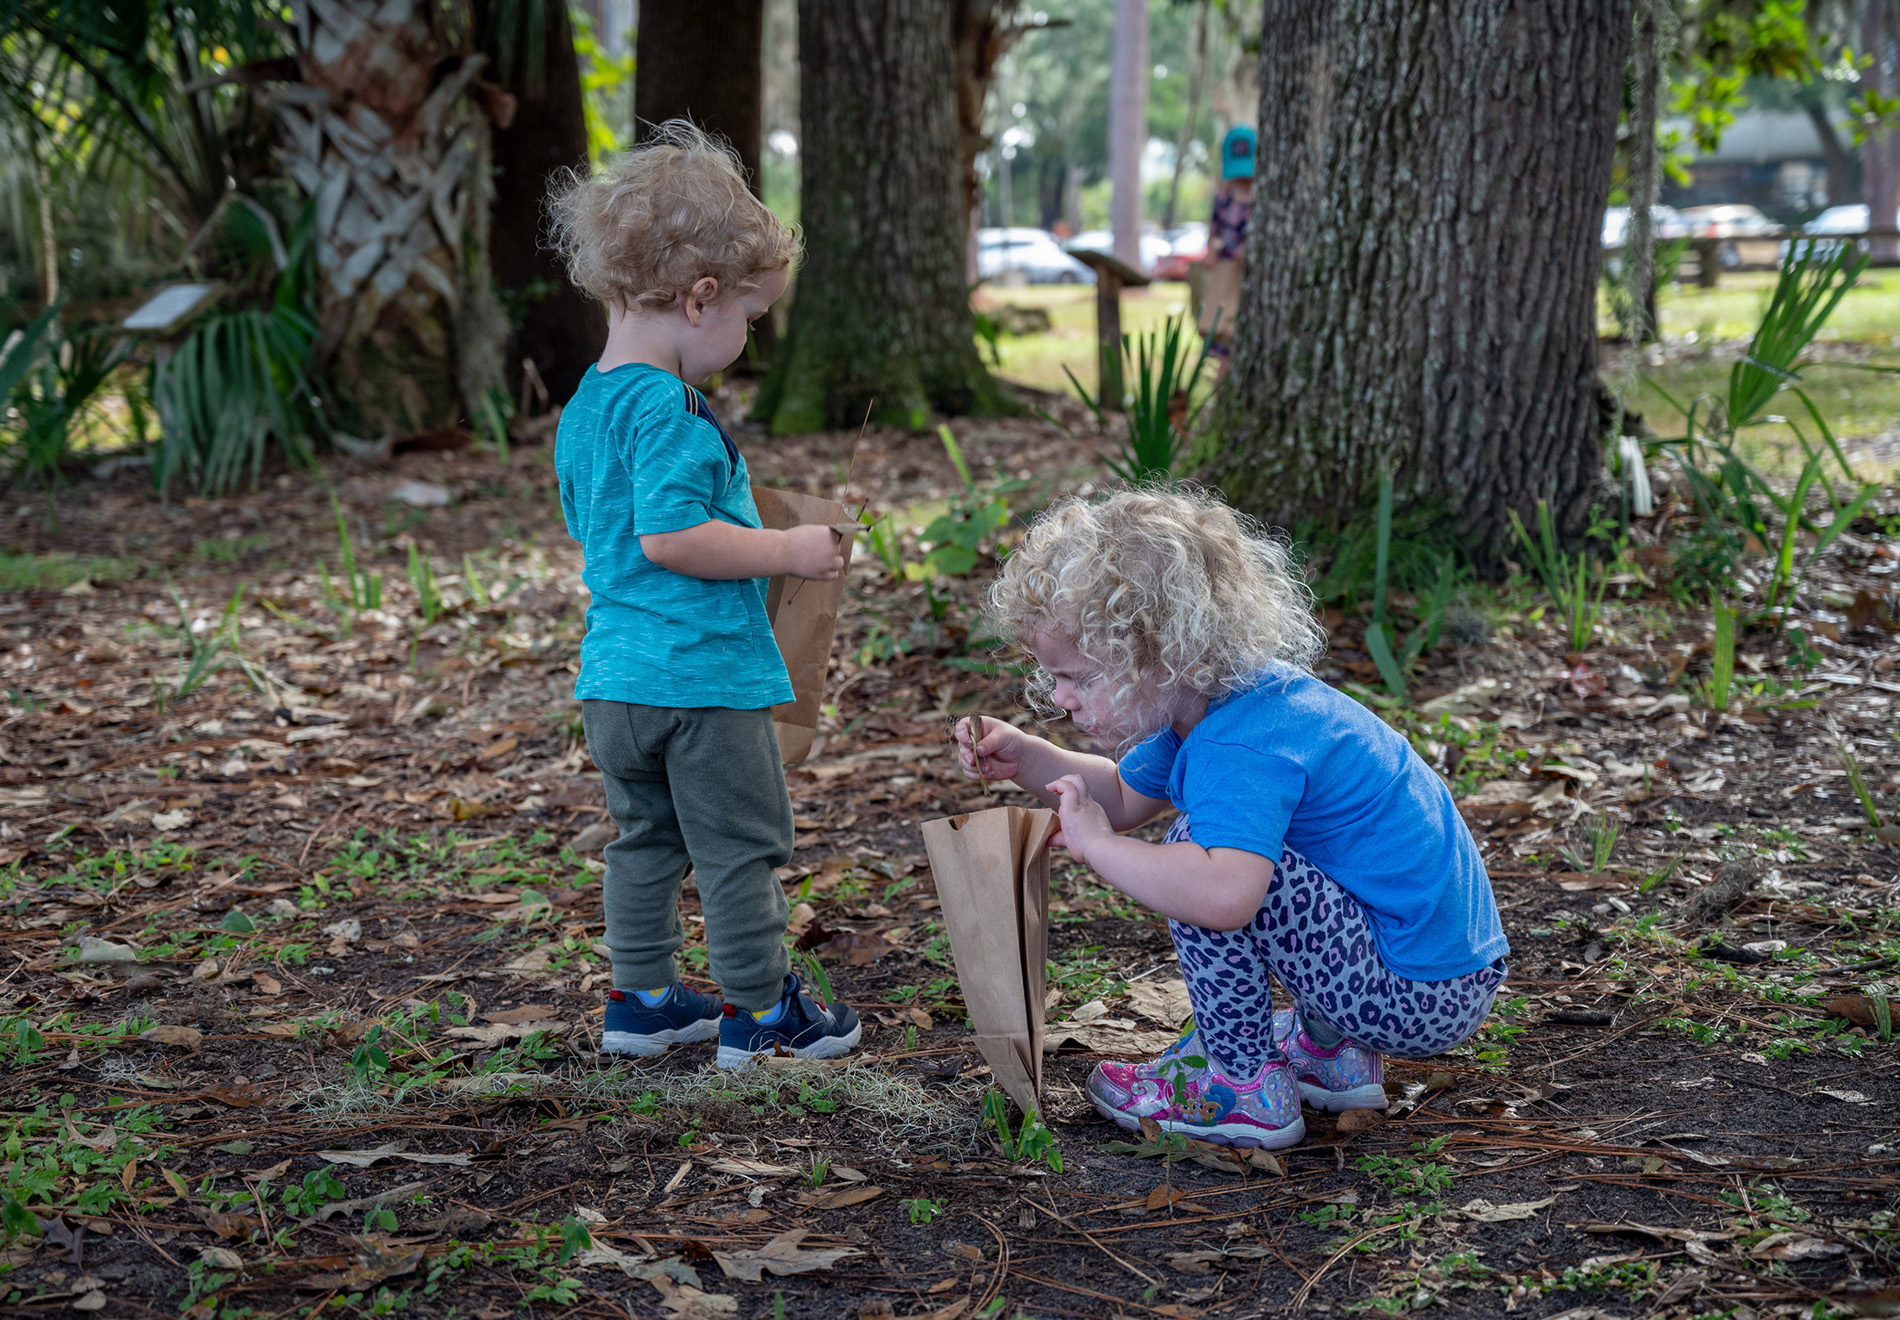 two young children outside holding brown paper bags, one child is kneeling down and placing sticks into the bag